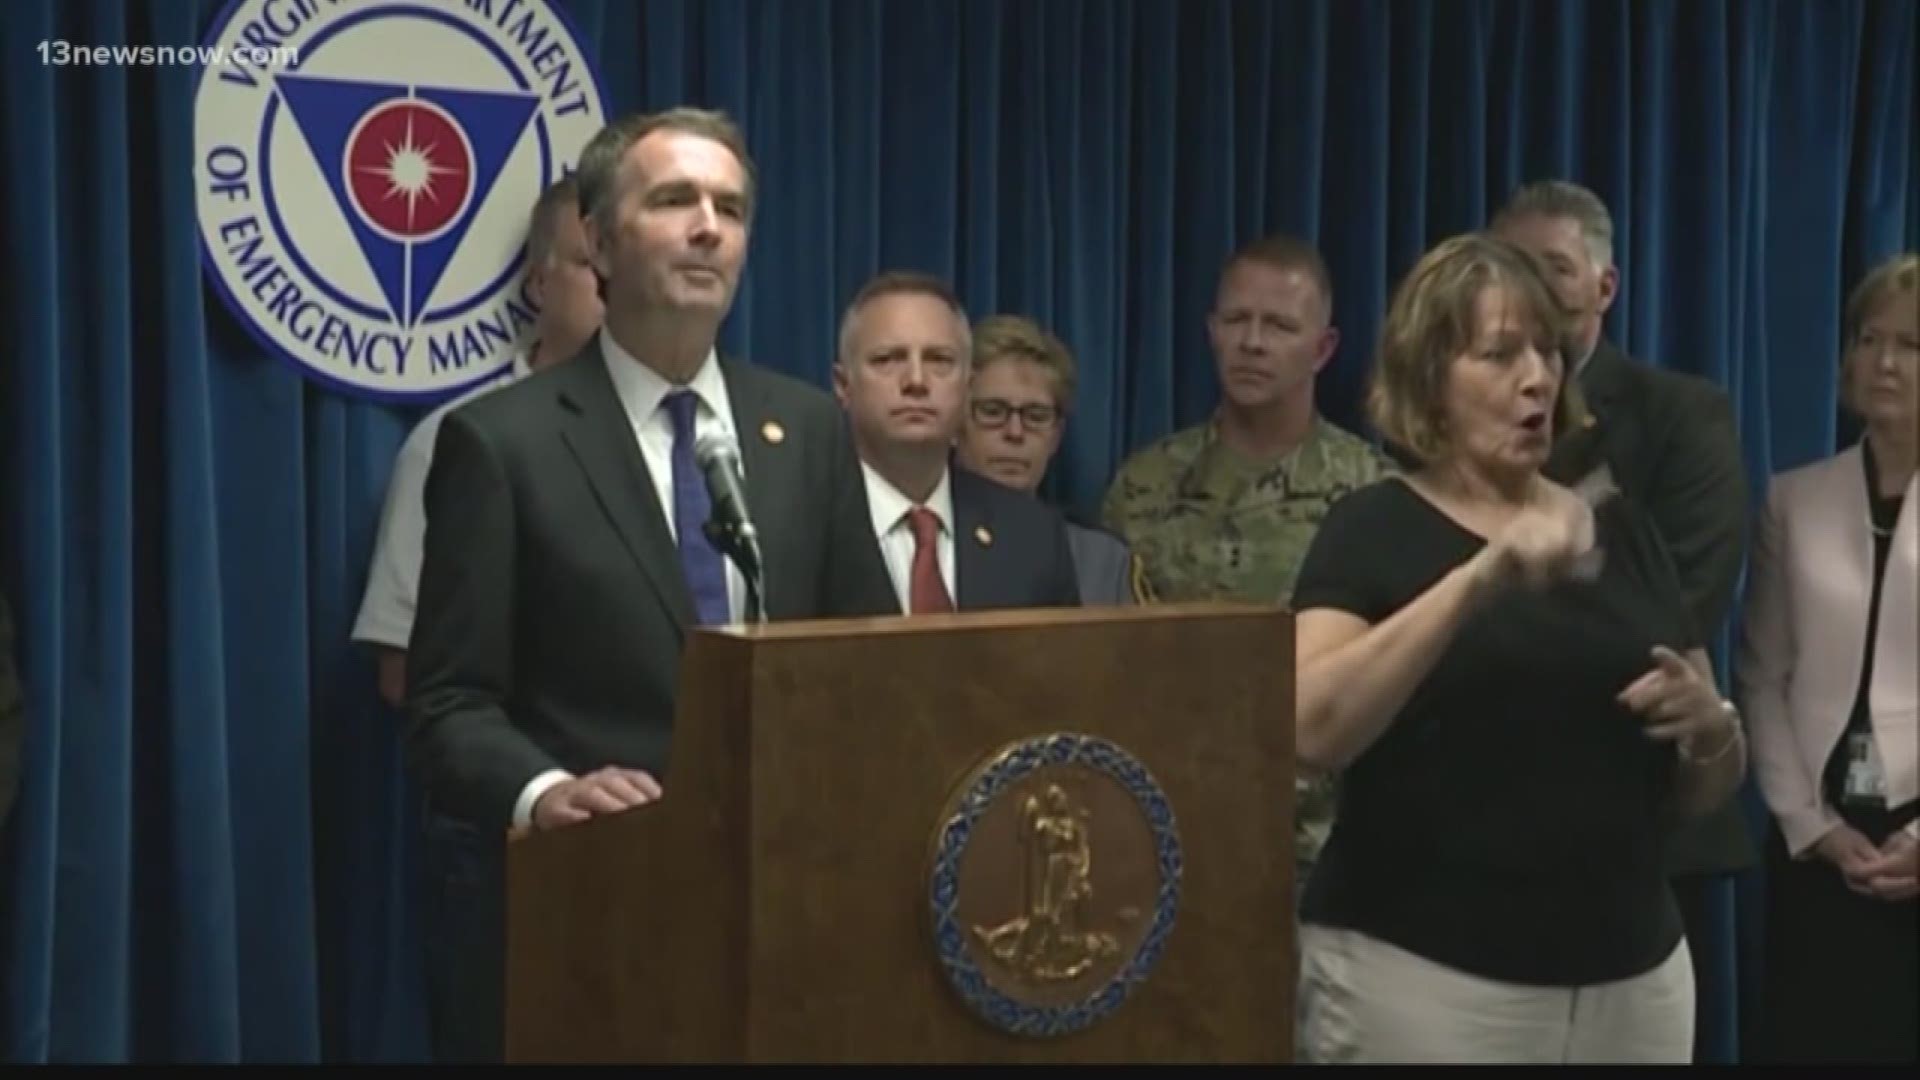 Governor Ralph Northam has declared a state of emergency with Florence barreling down on the region.